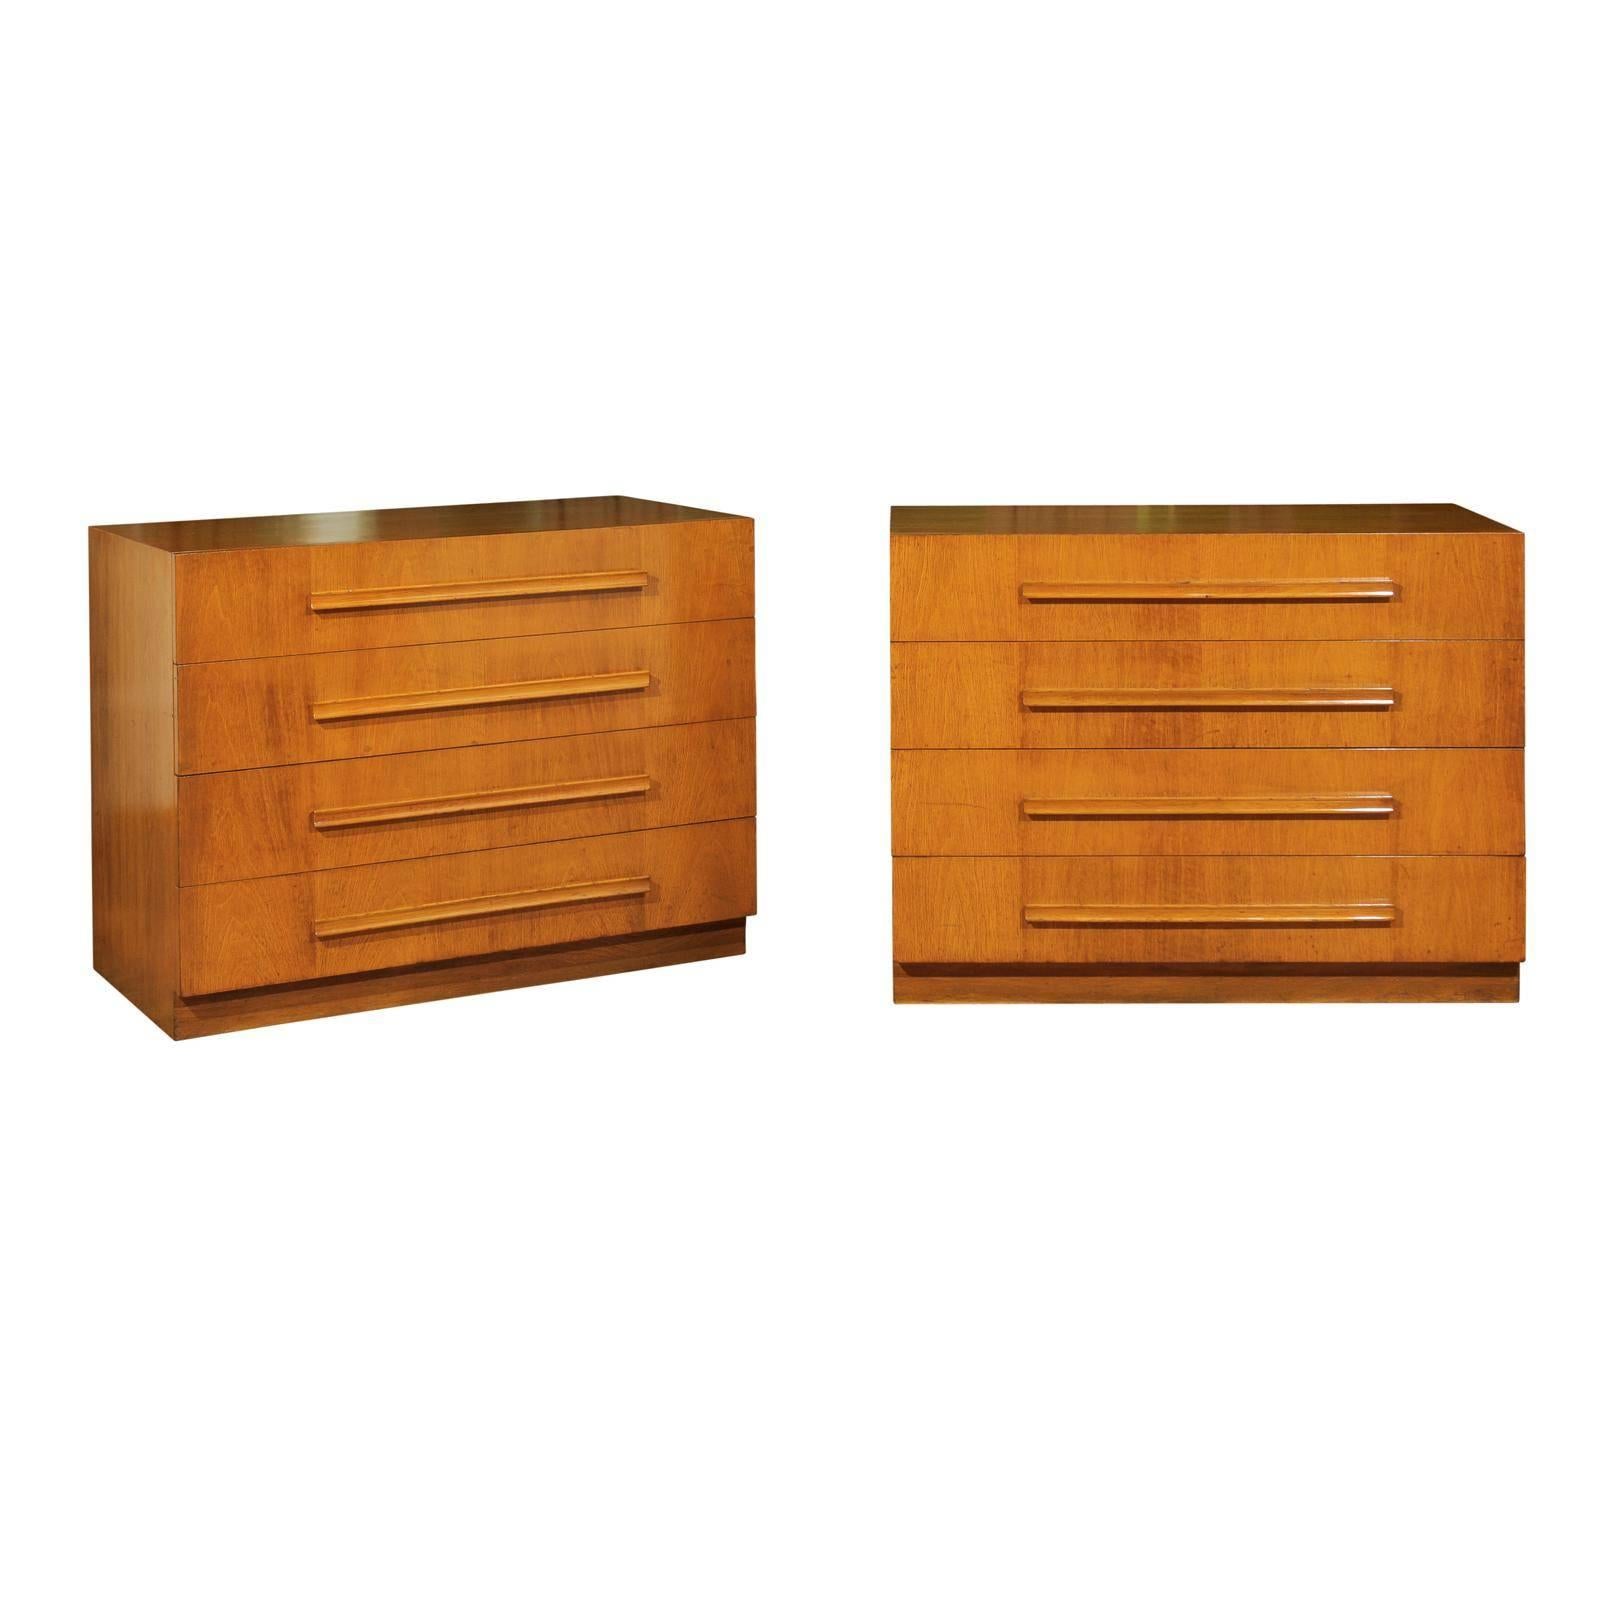 Coveted Pair of Saffron Walnut Commodes by T H Robsjohn-Gibbings, dated 1950  For Sale